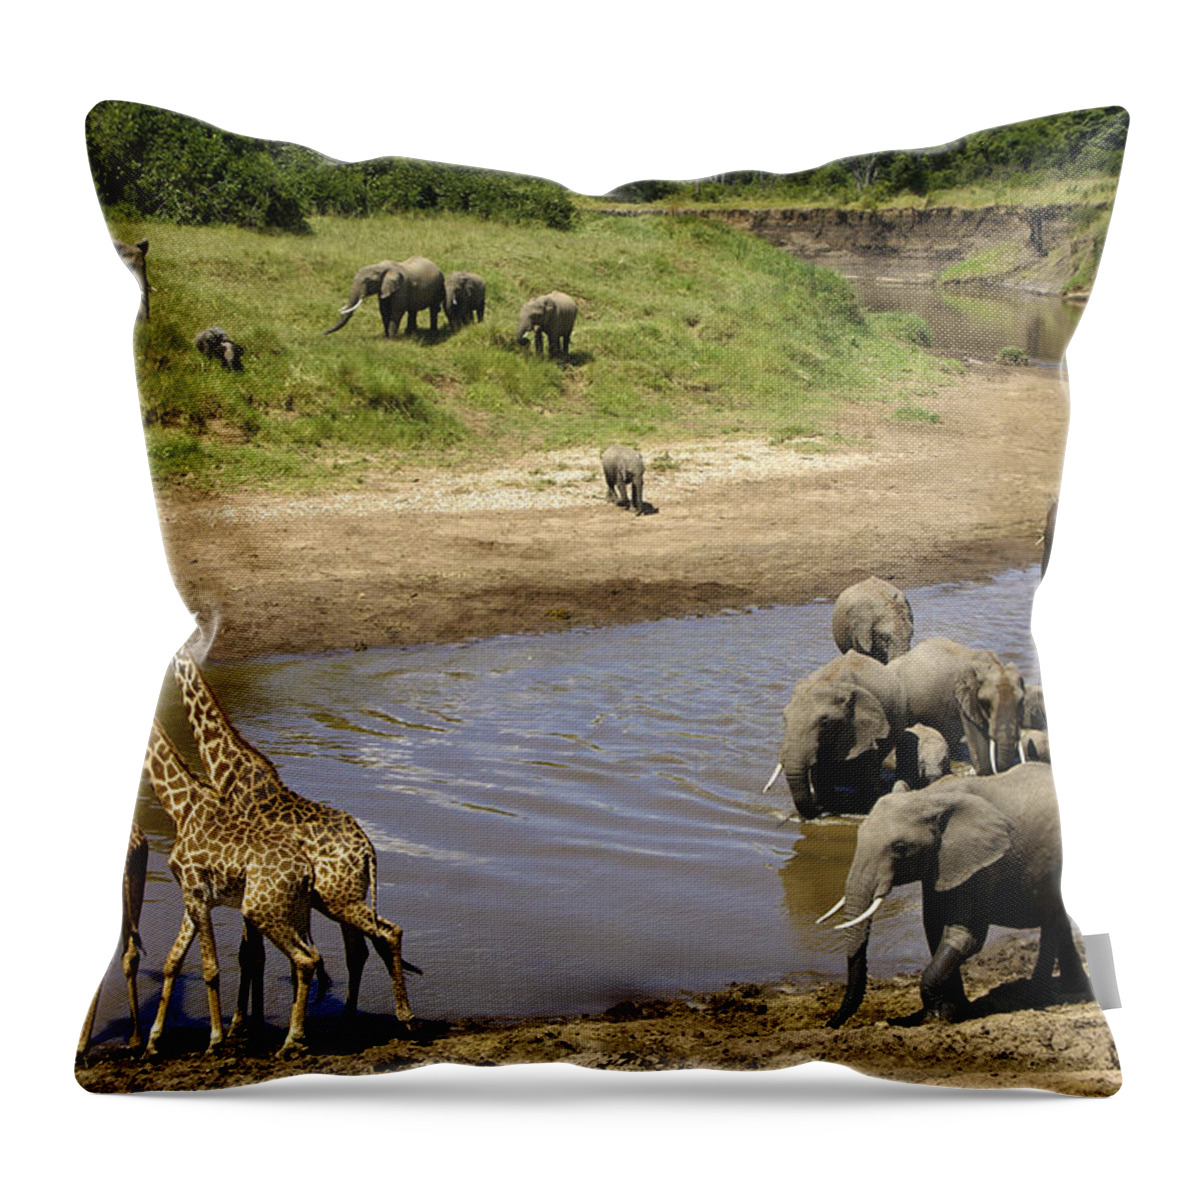 Africa Throw Pillow featuring the photograph River Crossing #2 by Michele Burgess